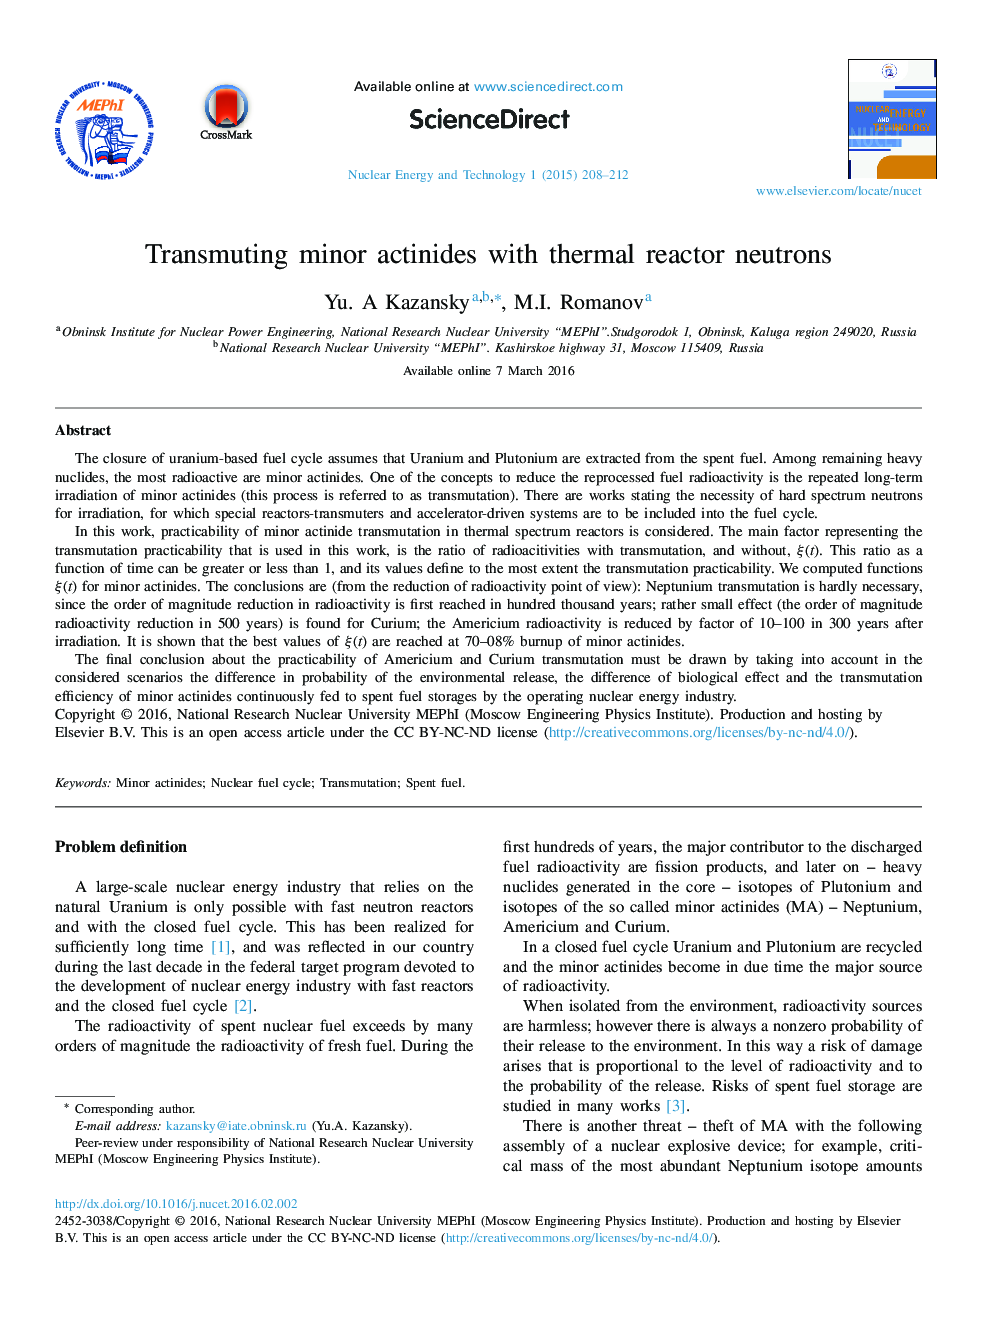 Transmuting minor actinides with thermal reactor neutrons